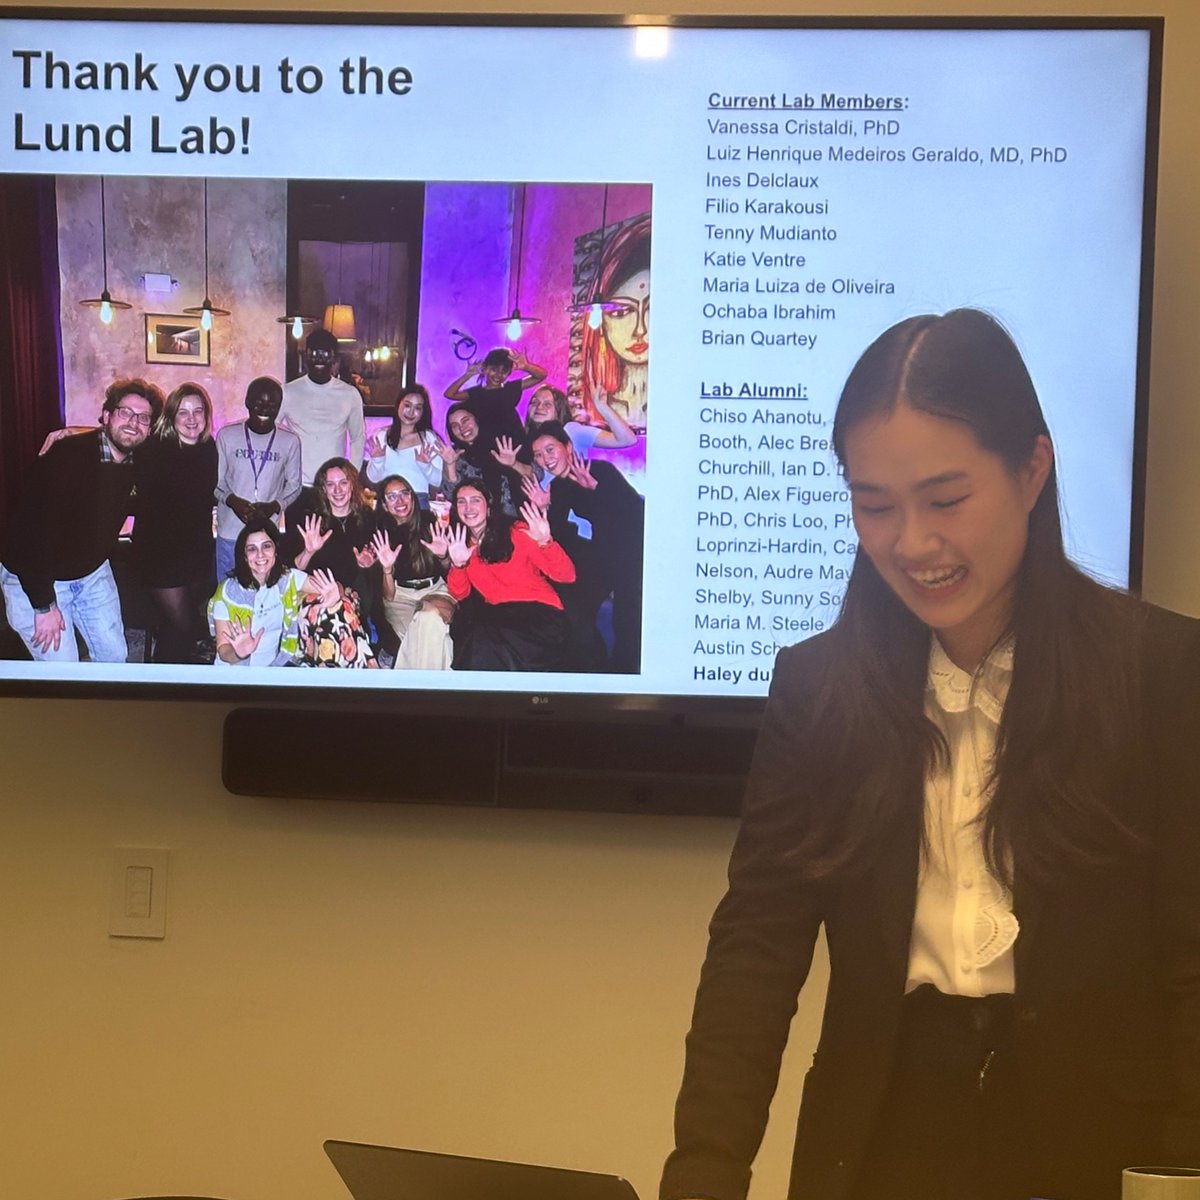 Congrats to Annie Chen, our fantastic undergrad who nailed her honors thesis presentation today!!